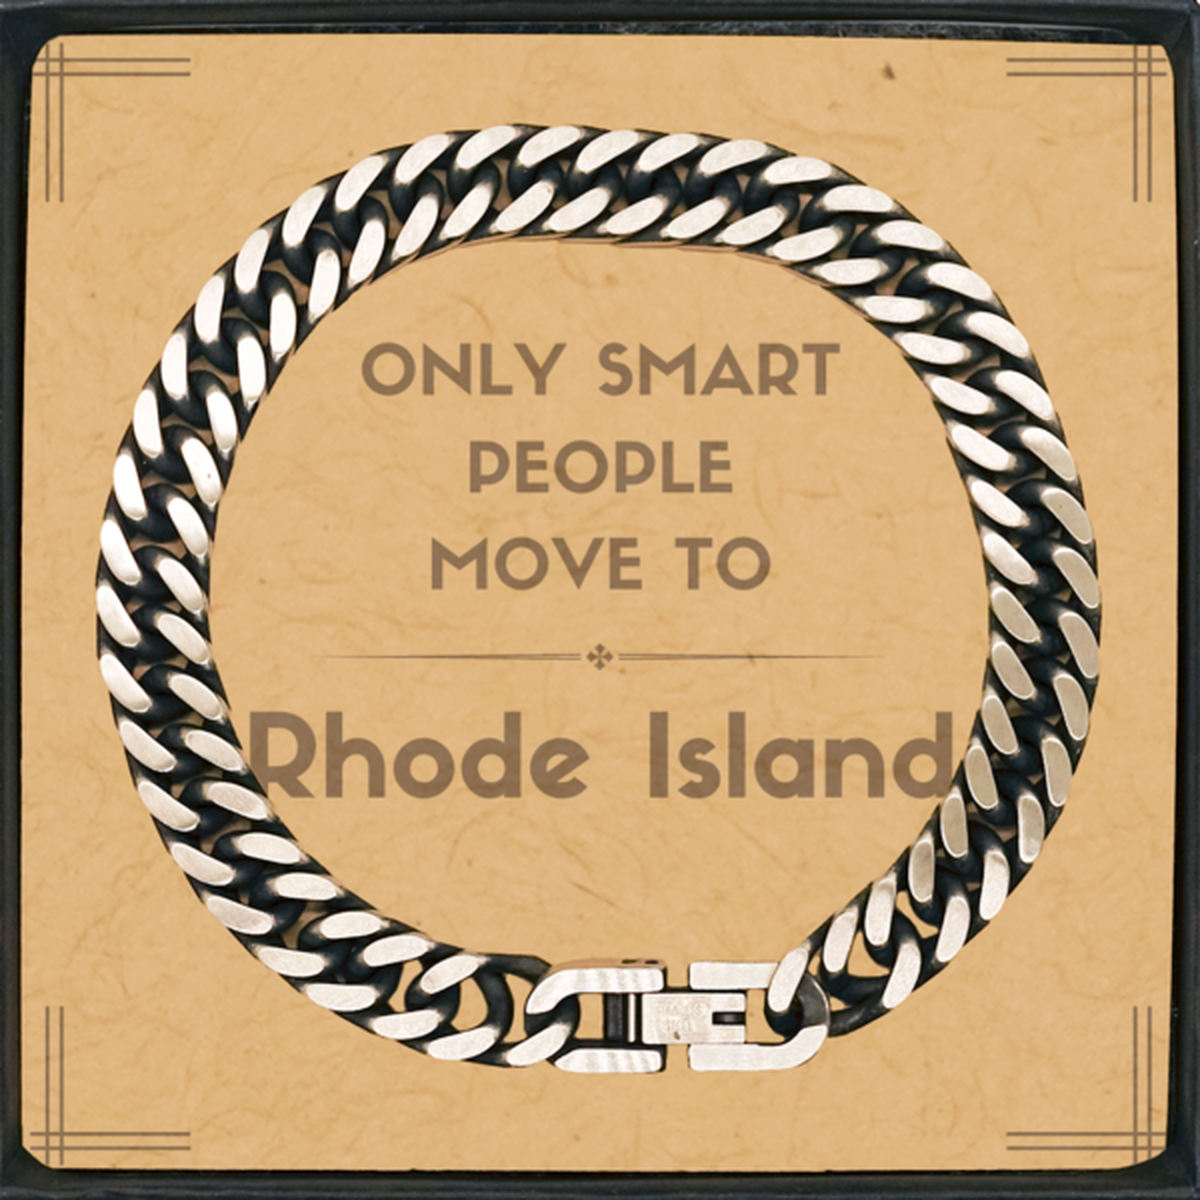 Only smart people move to Rhode Island Cuban Link Chain Bracelet, Message Card Gifts For Rhode Island, Move to Rhode Island Gifts for Friends Coworker Funny Saying Quote